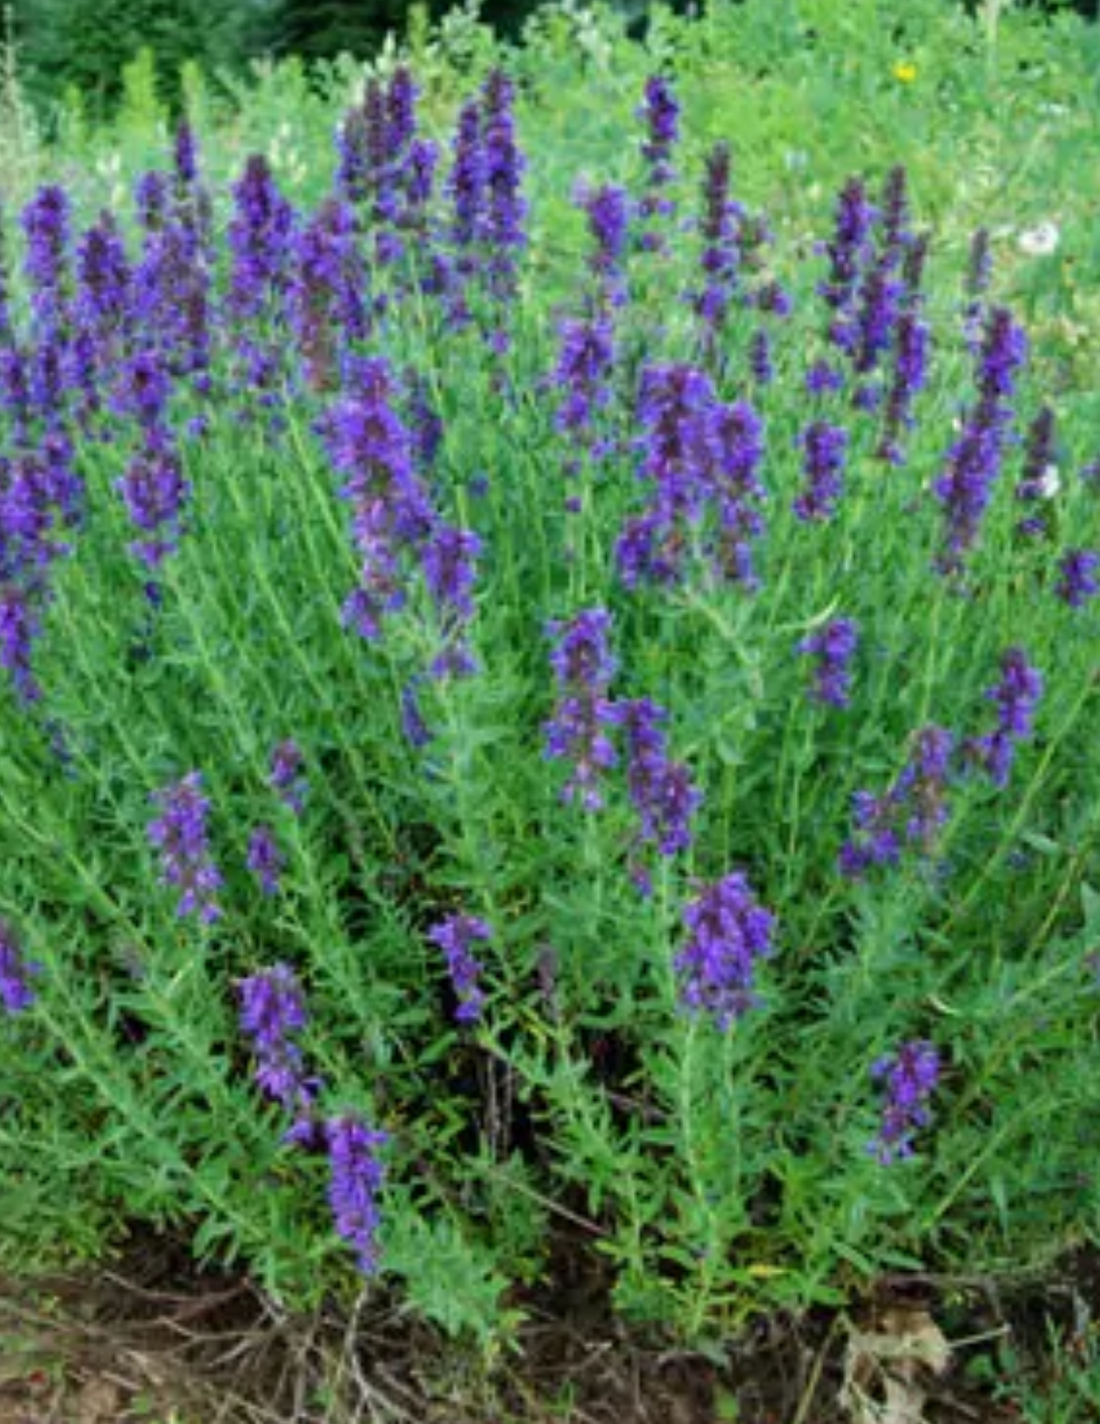 Hyssop plant with aromatic blue flowers